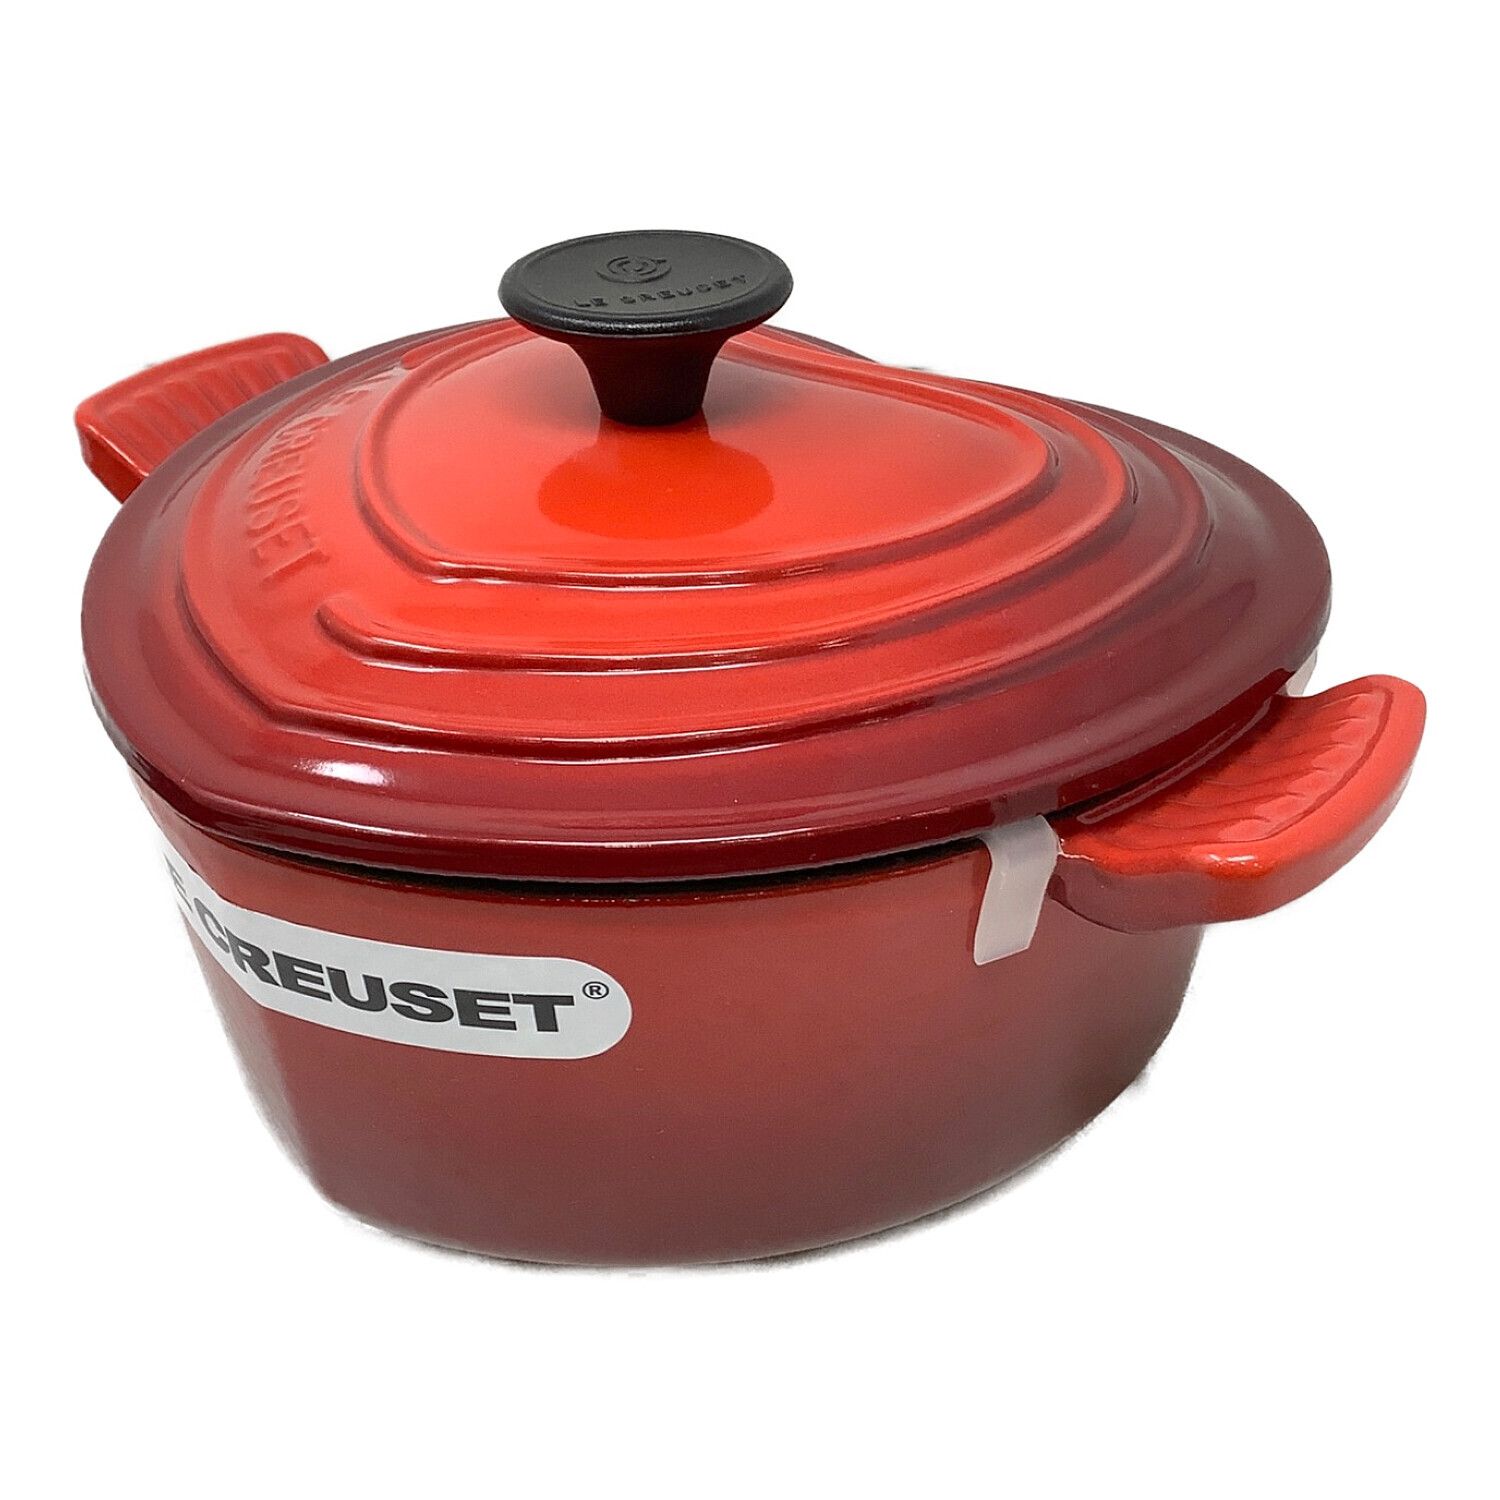 LE CREUSET (ルクルーゼ) 両手鍋 レッド 1.9L ハート型 ココット 